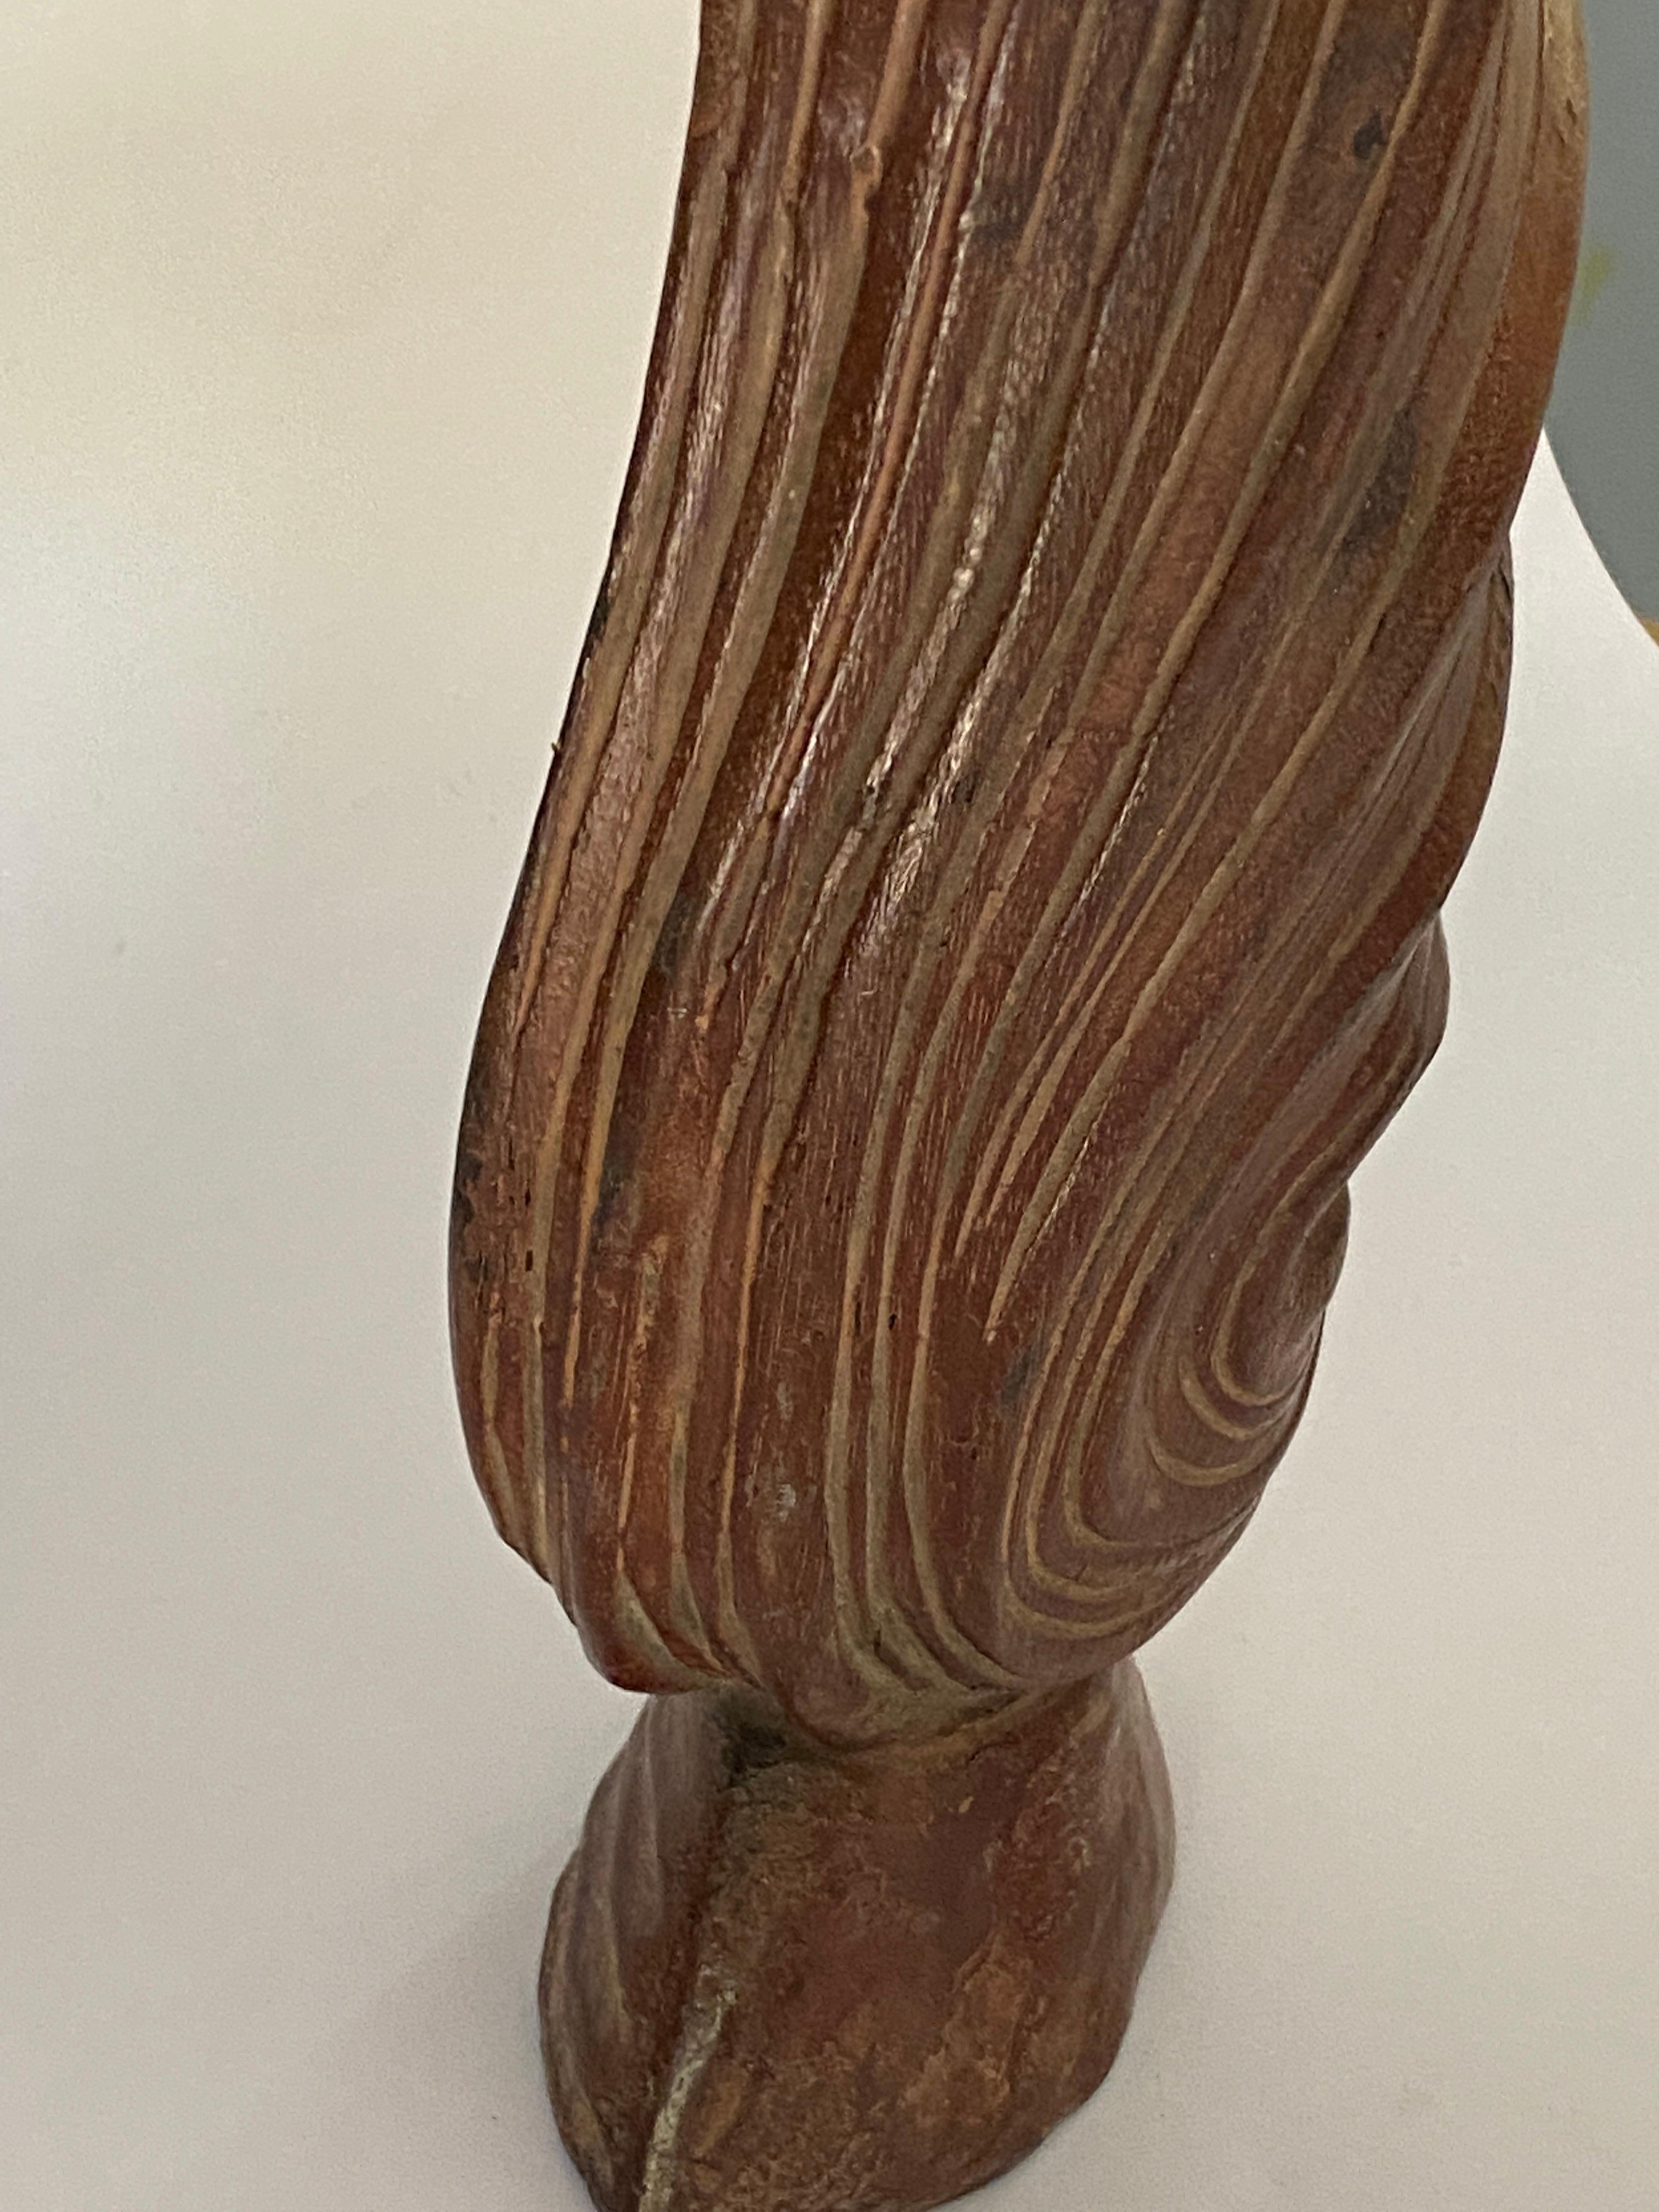 Wood Abstract Sculpture, Shell Shape, Brown Color, France, 1960 For Sale 2